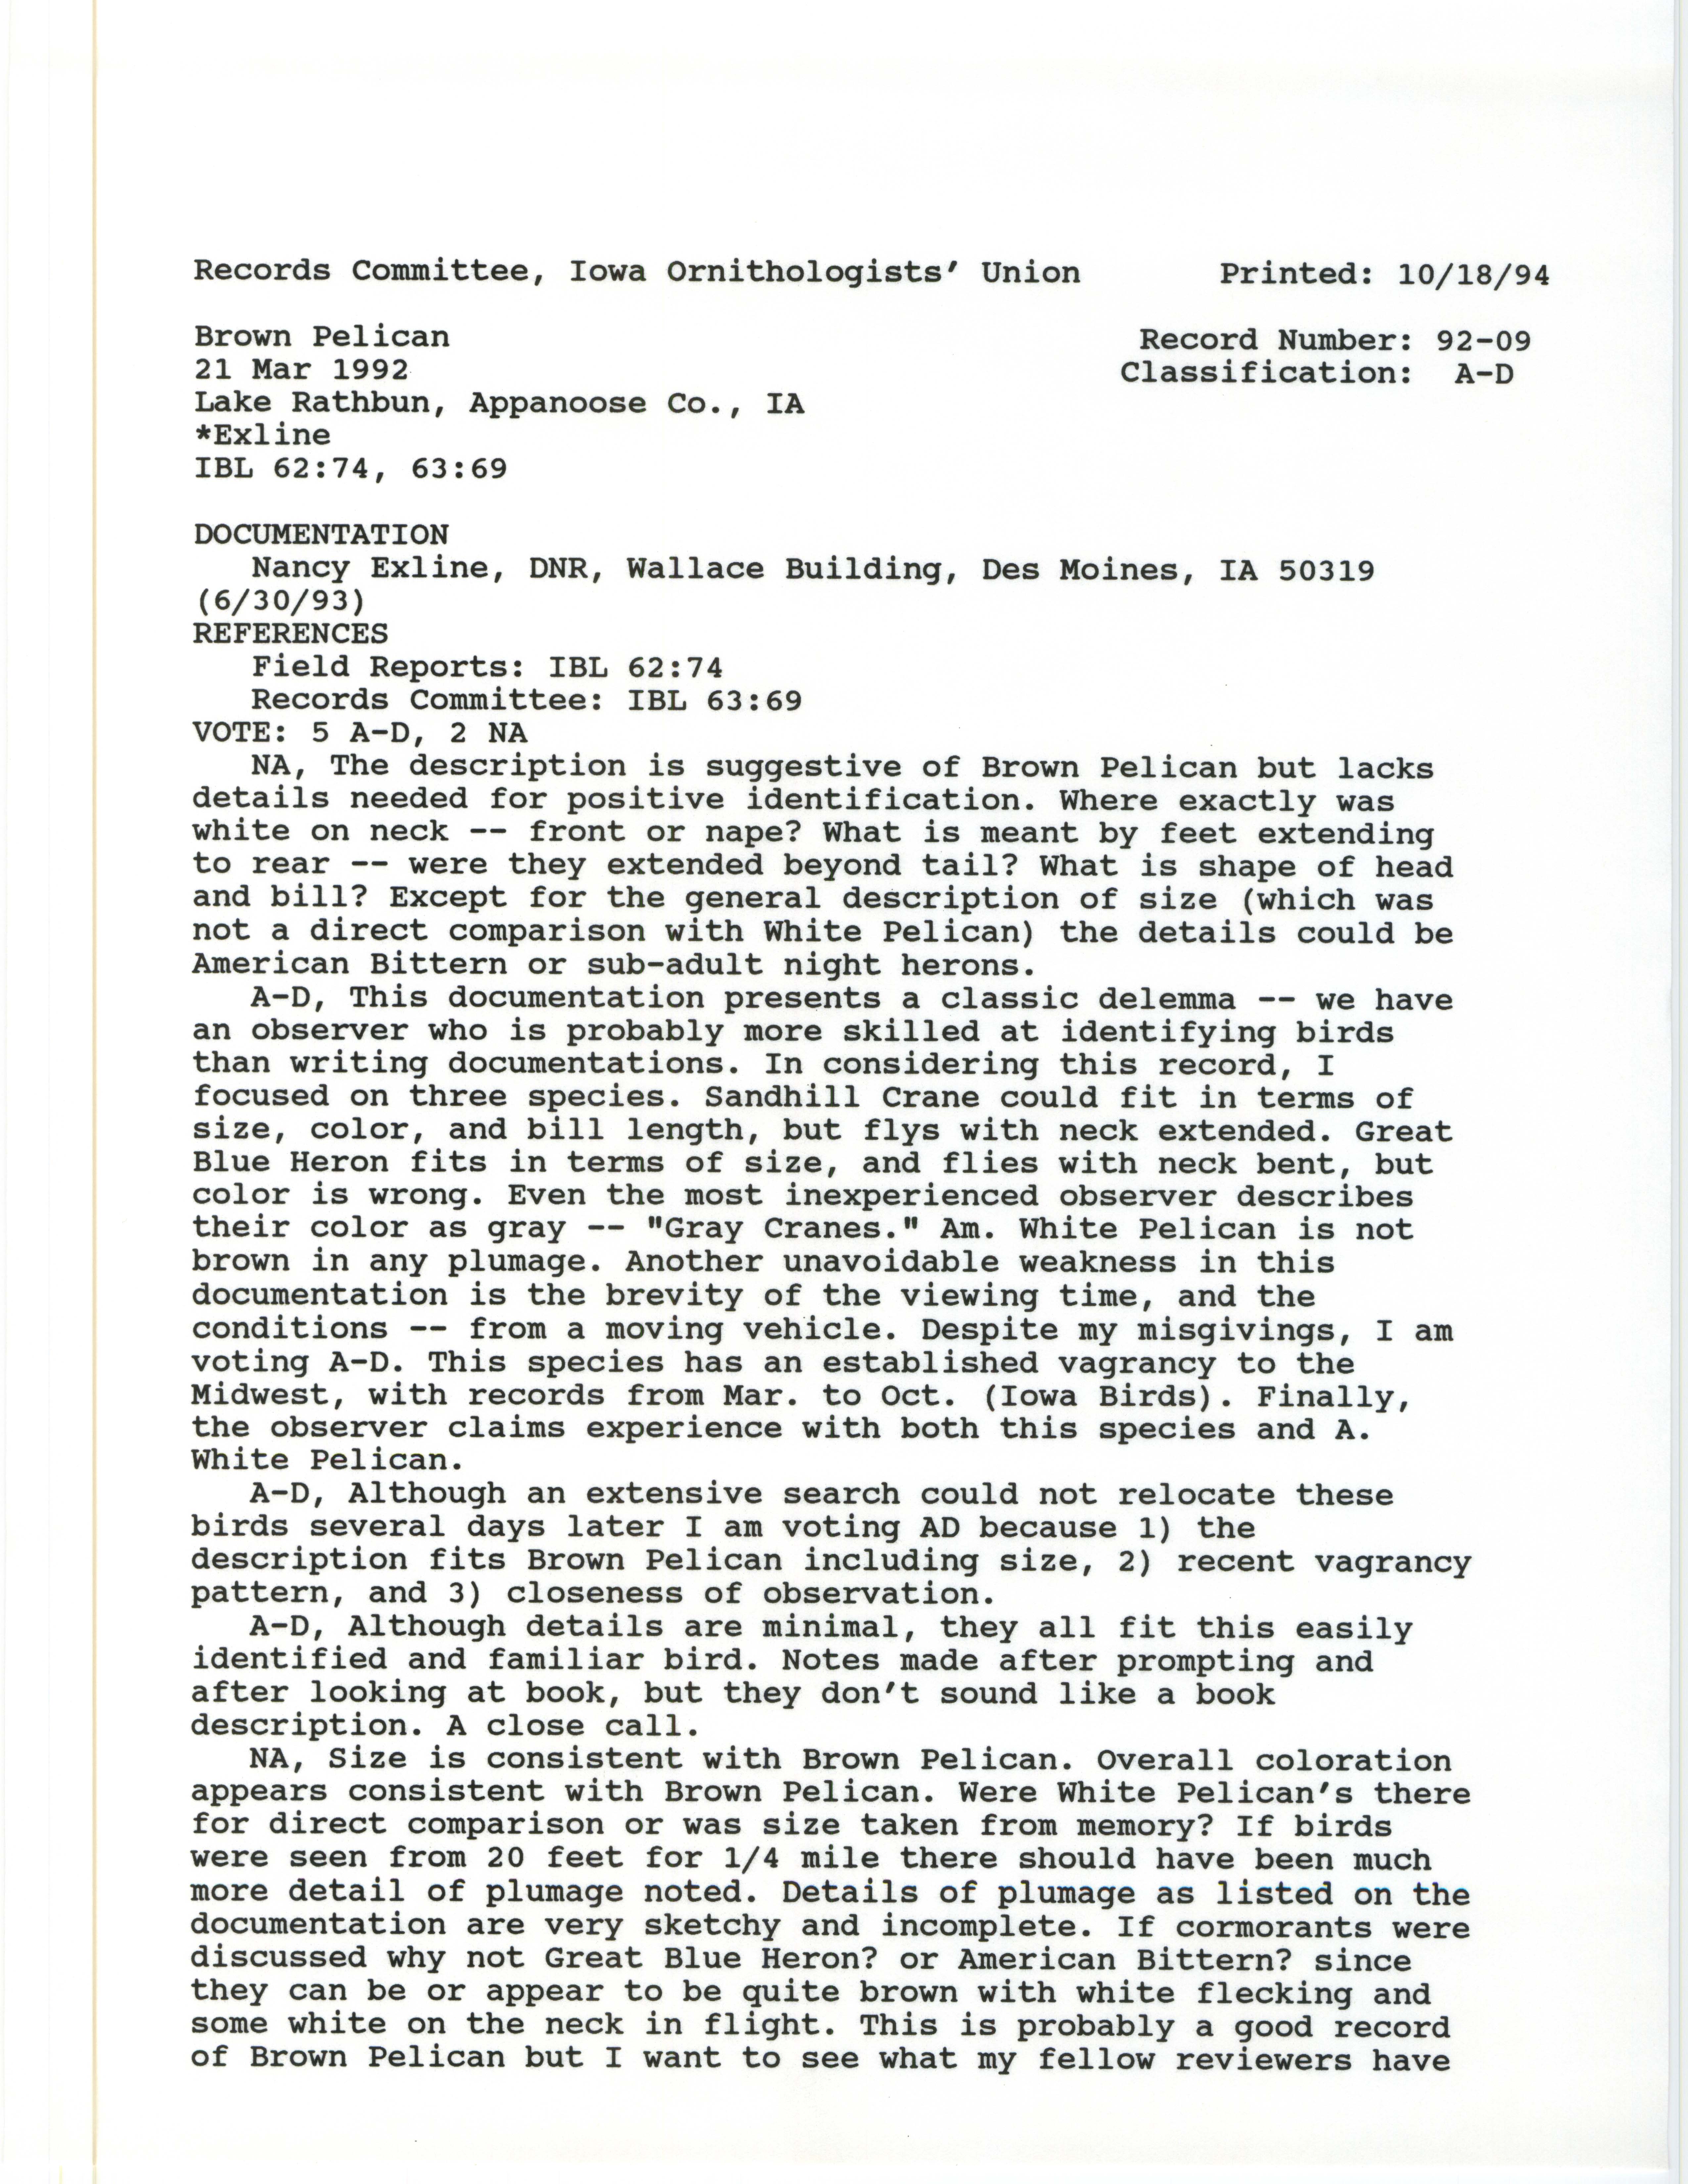 Records Committee review for rare bird sighting of Brown Pelican at Lake Rathbun, 1992